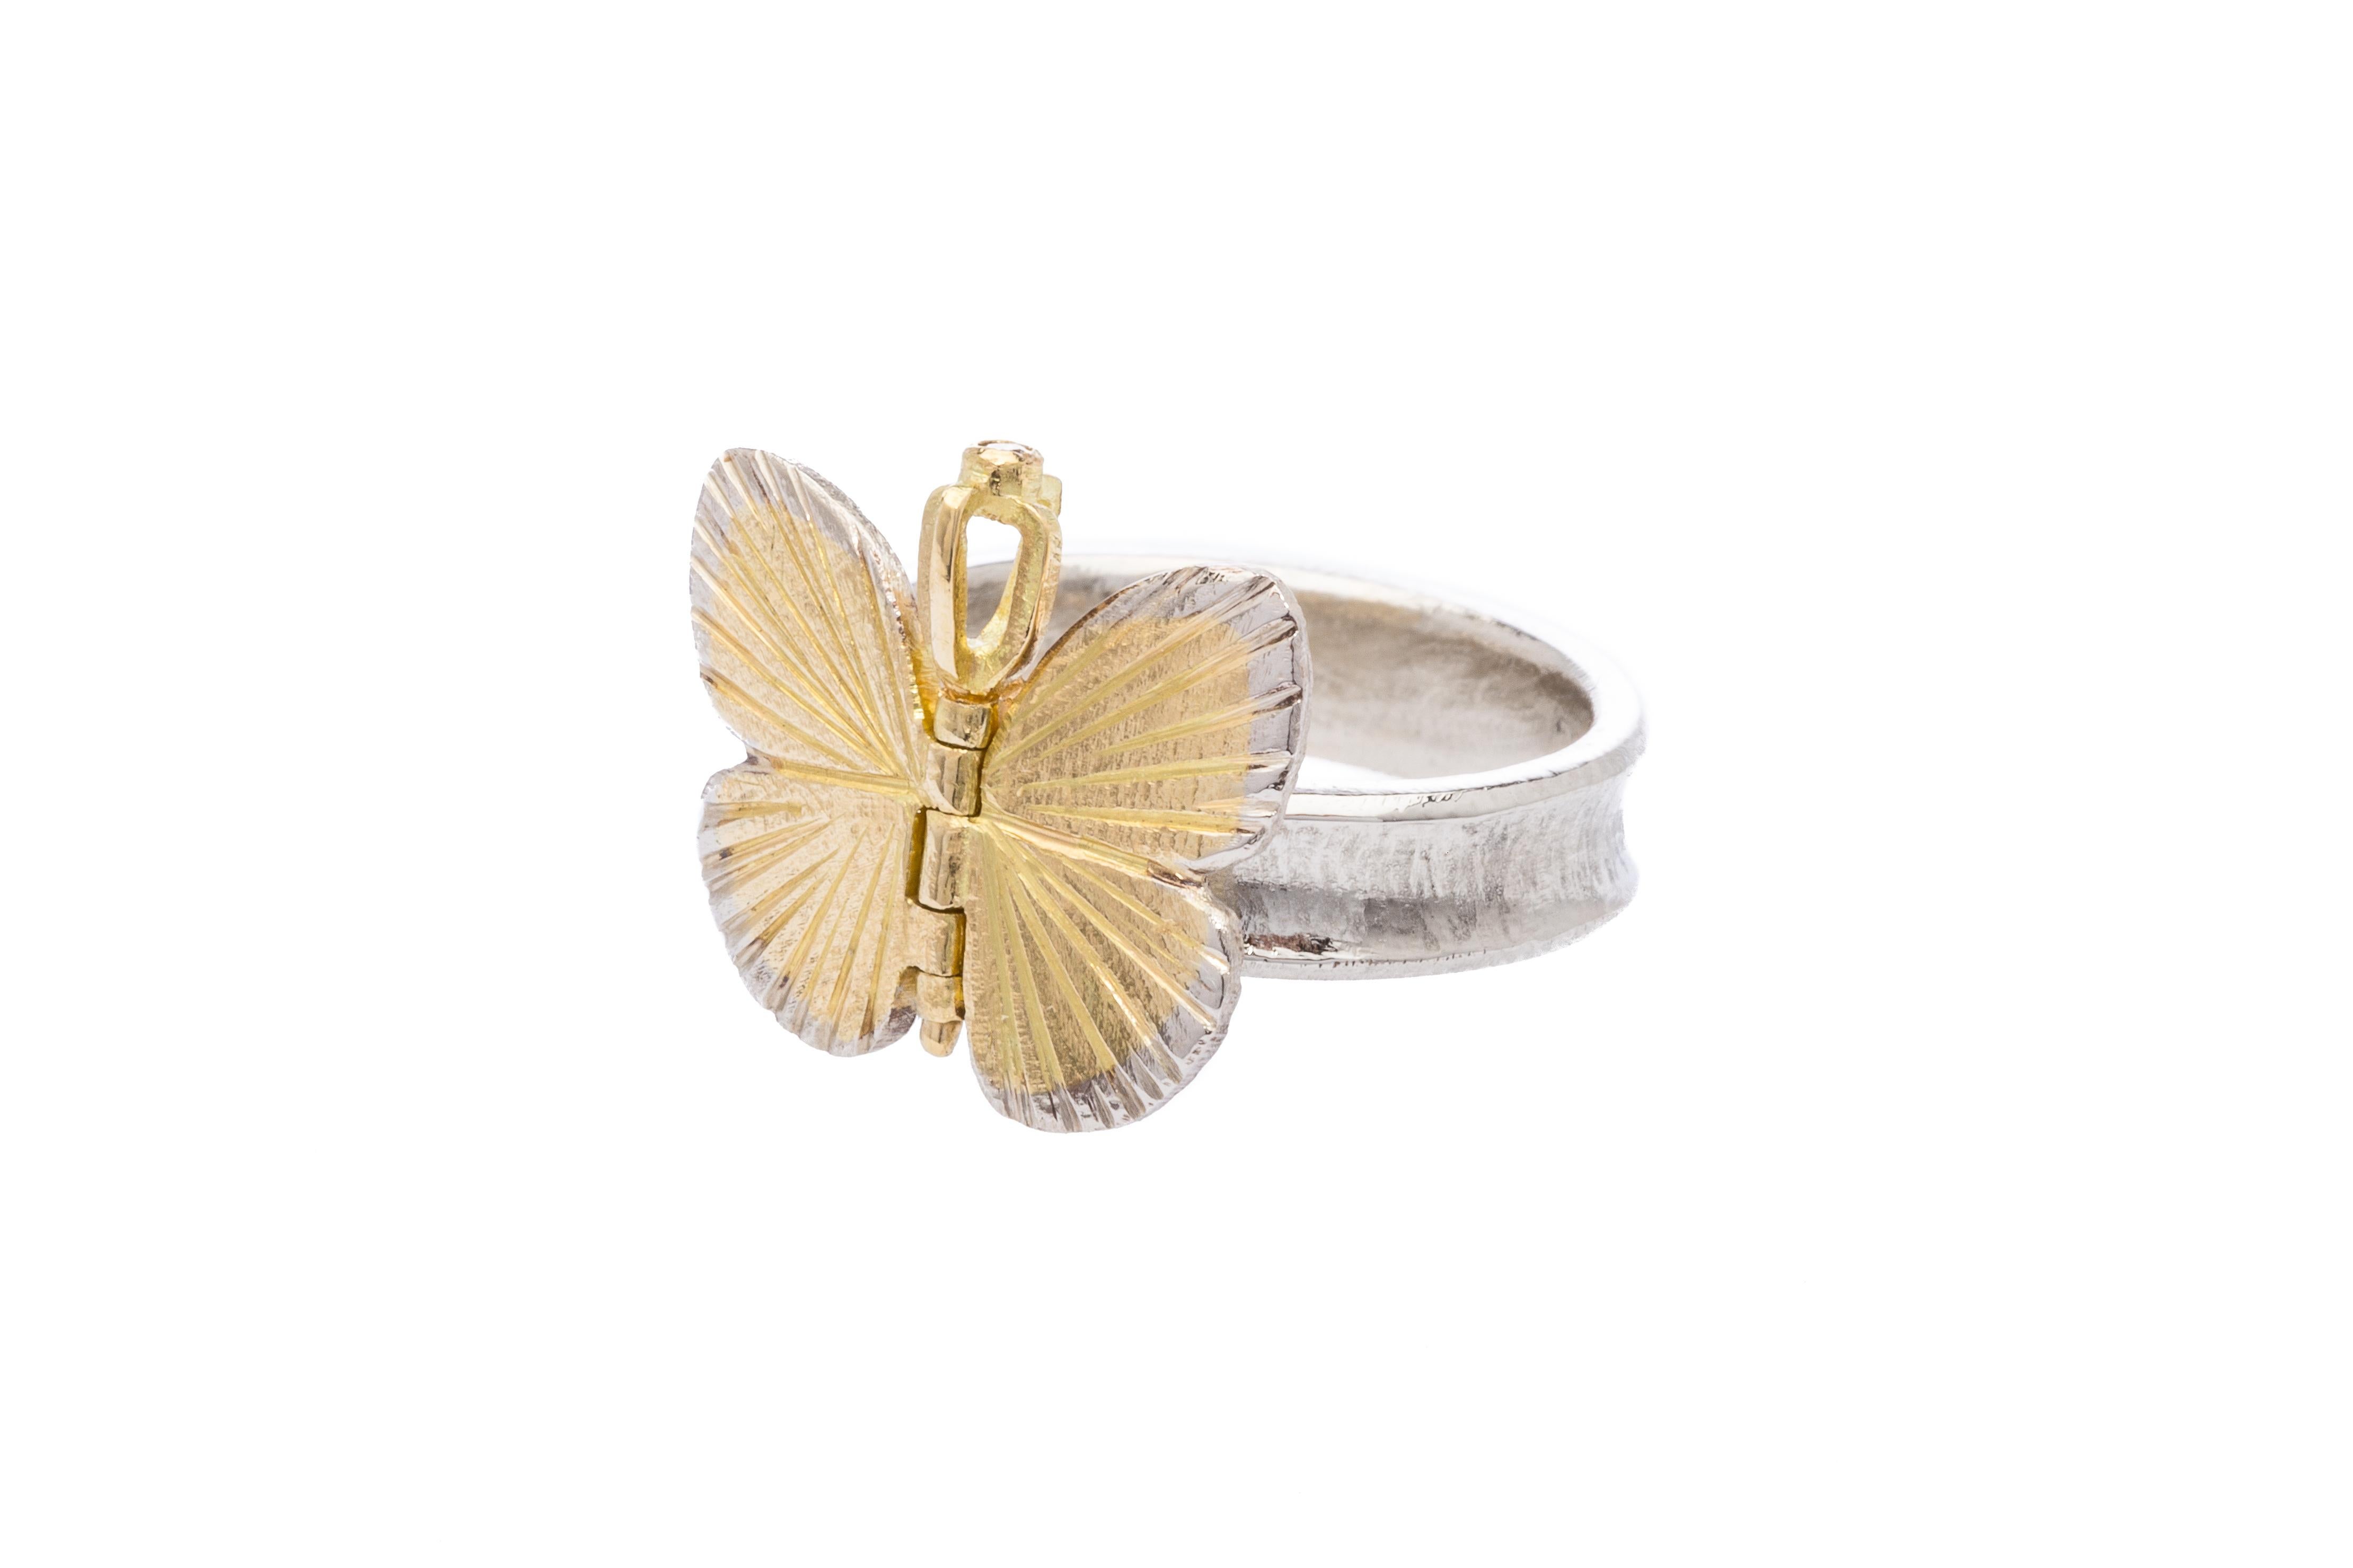 James Banks's signature butterfly ring features a Baby Asterope butterfly set in 18k Yellow Gold and 18k White Gold inlay, with a hinge in the center to allow movement of the wings topped with a solid gold crown, set on a thick 18k White Gold band.